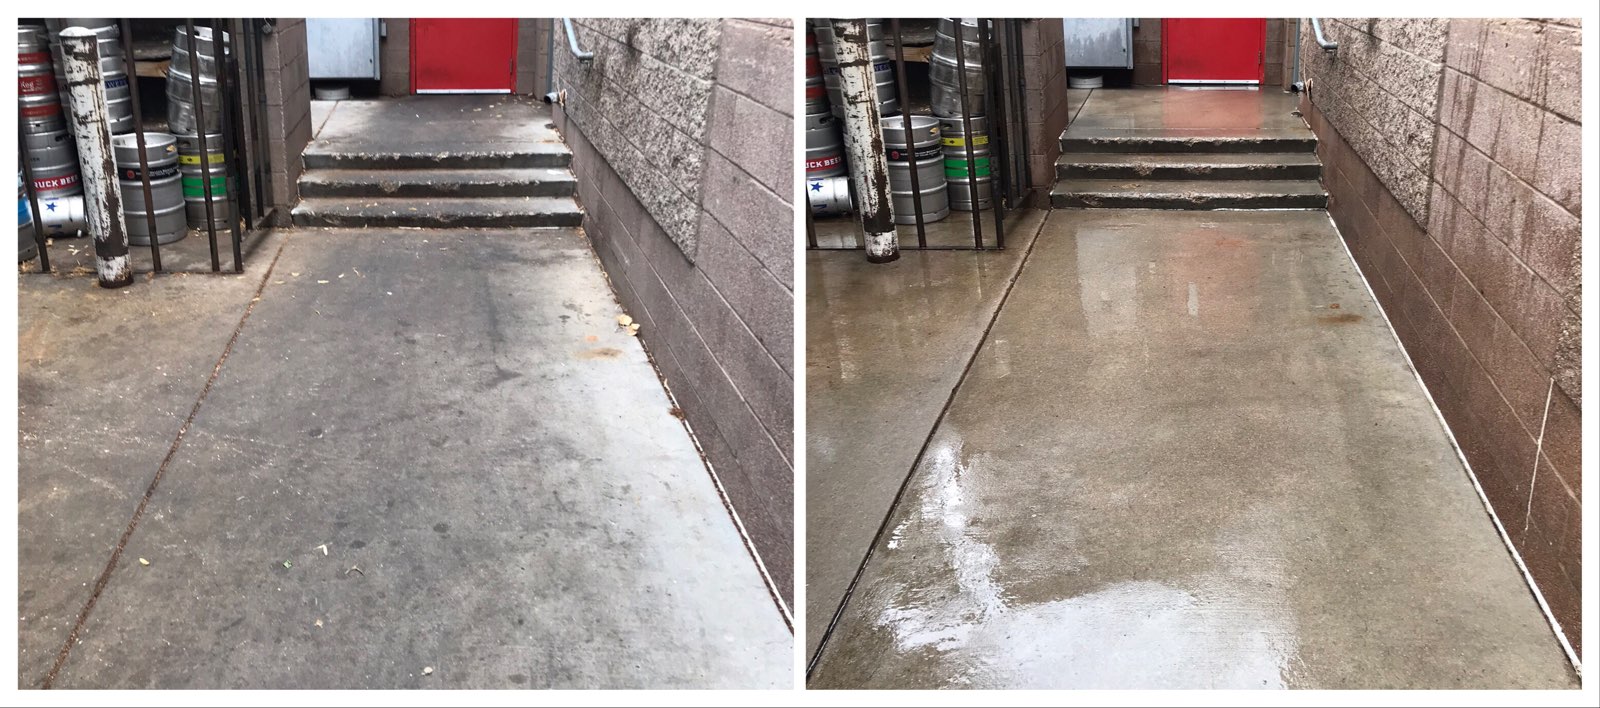 Restaurant Cleaning & Pressure Washing in Fort Collins, Loveland, Greeley, Windsor, Longmont, Berthoud Wellington, Estes Park, Cheyenne Wyoming and surrounding areas.